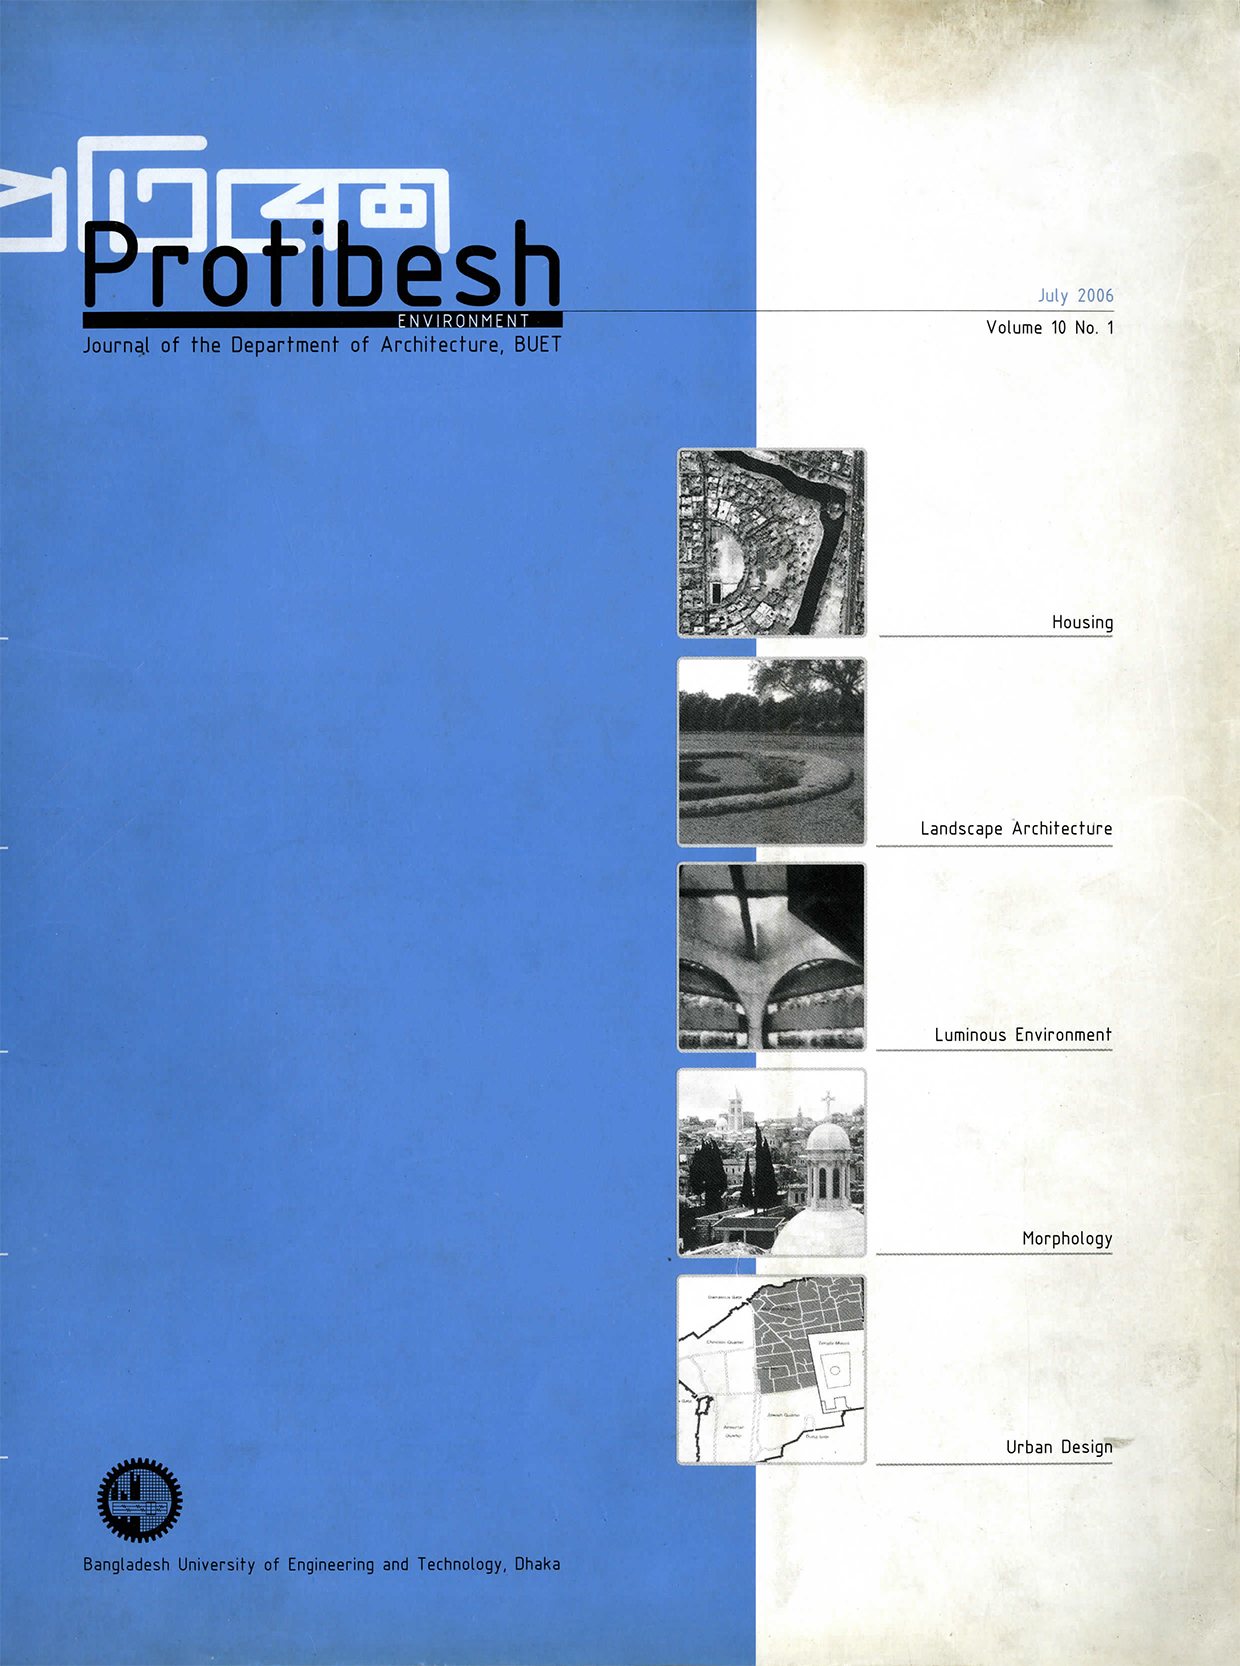 Cover image of Protibesh Vol-10 No-01 July-2006 - Journal of the Department of Architecture, BUET